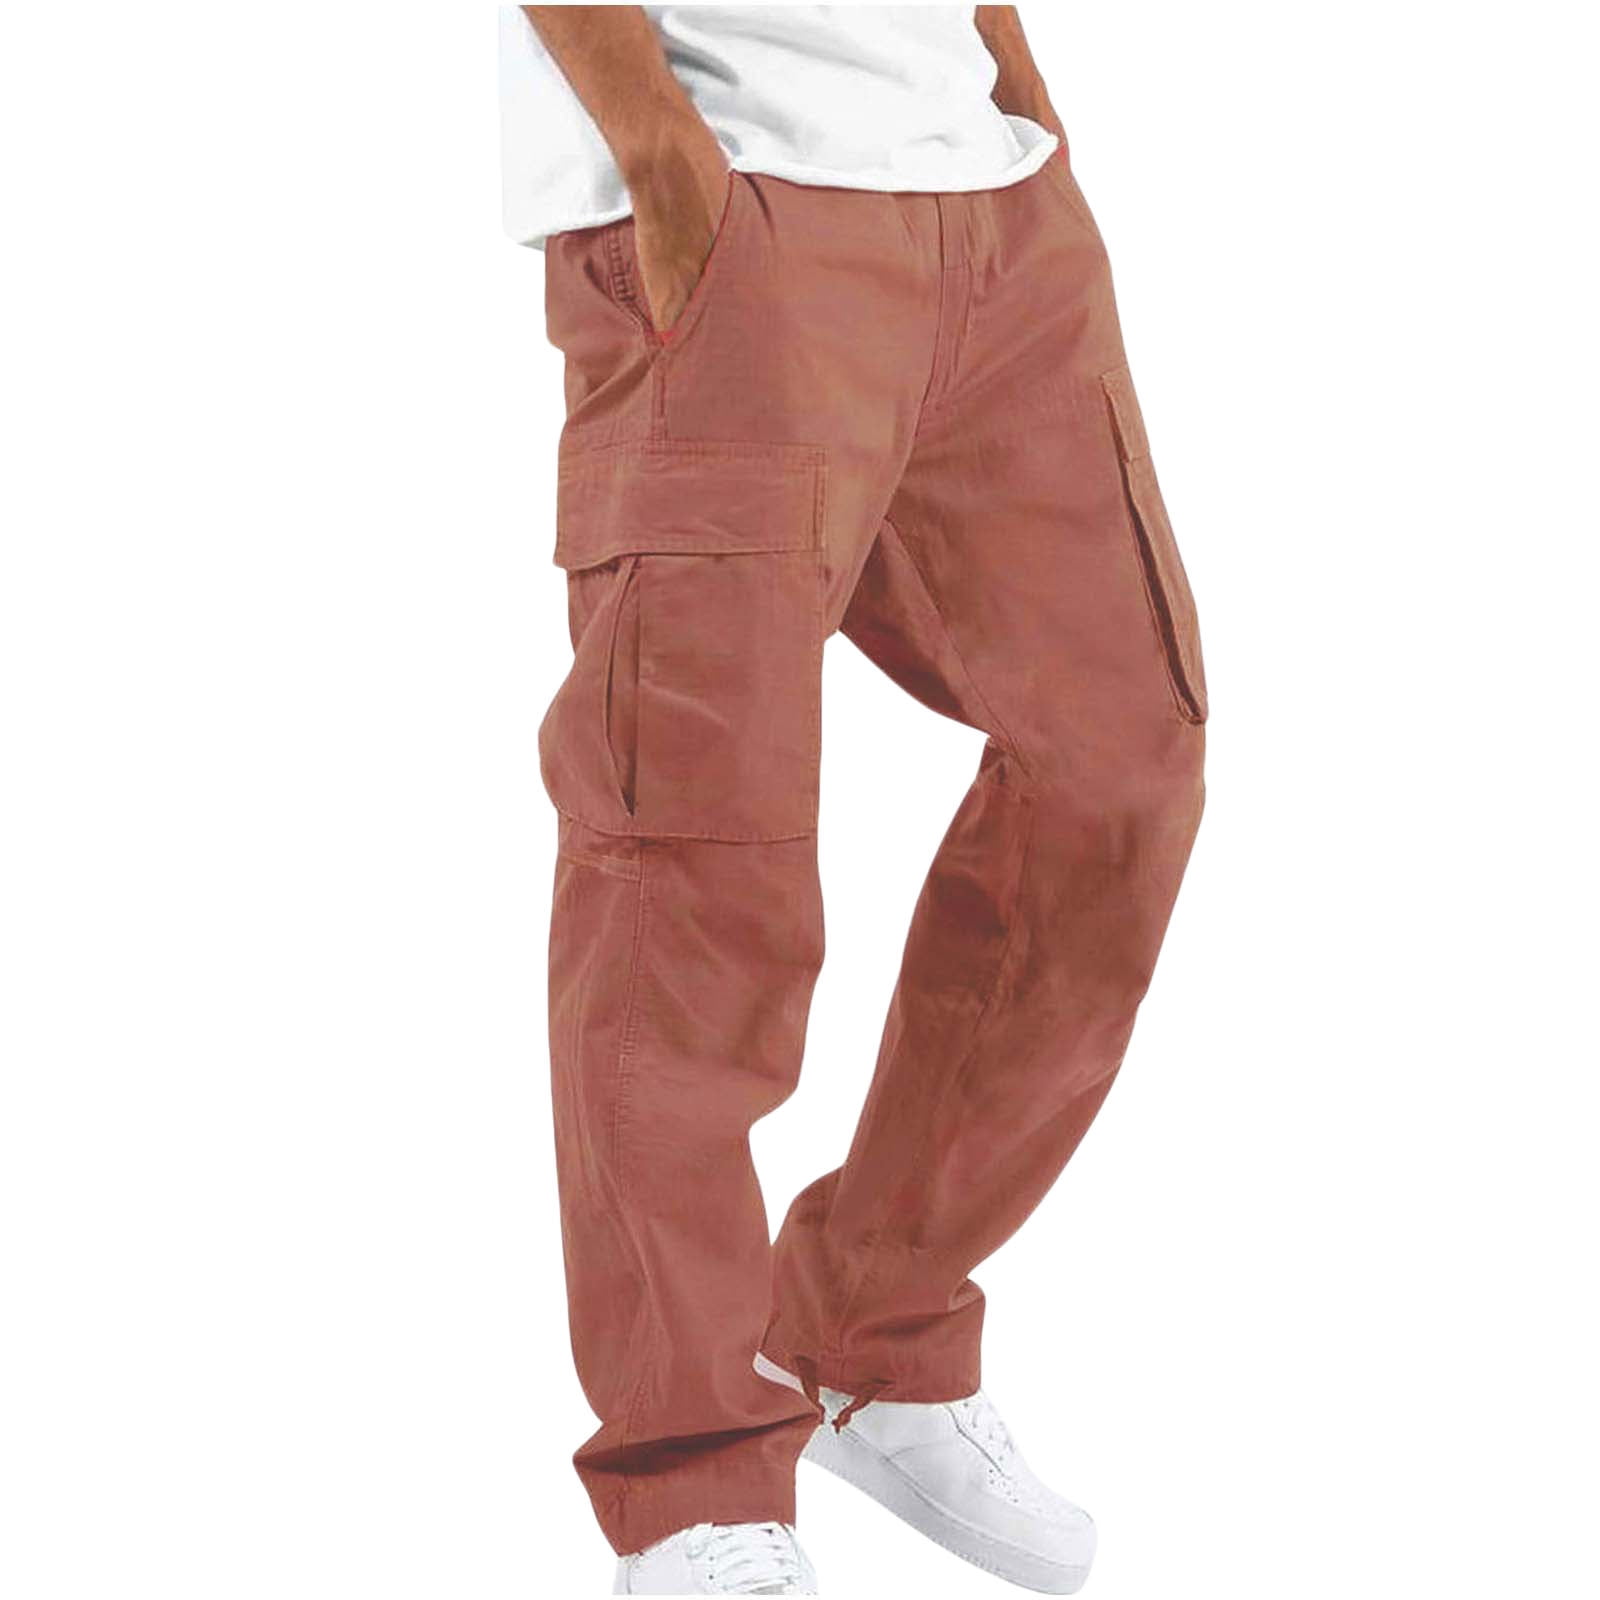 symoid Baggy Cargo Pants for Men- Solid Casual Multiple Pockets Outdoor Straight Type Fitness Pants Pants Trousers Red - Walmart.com